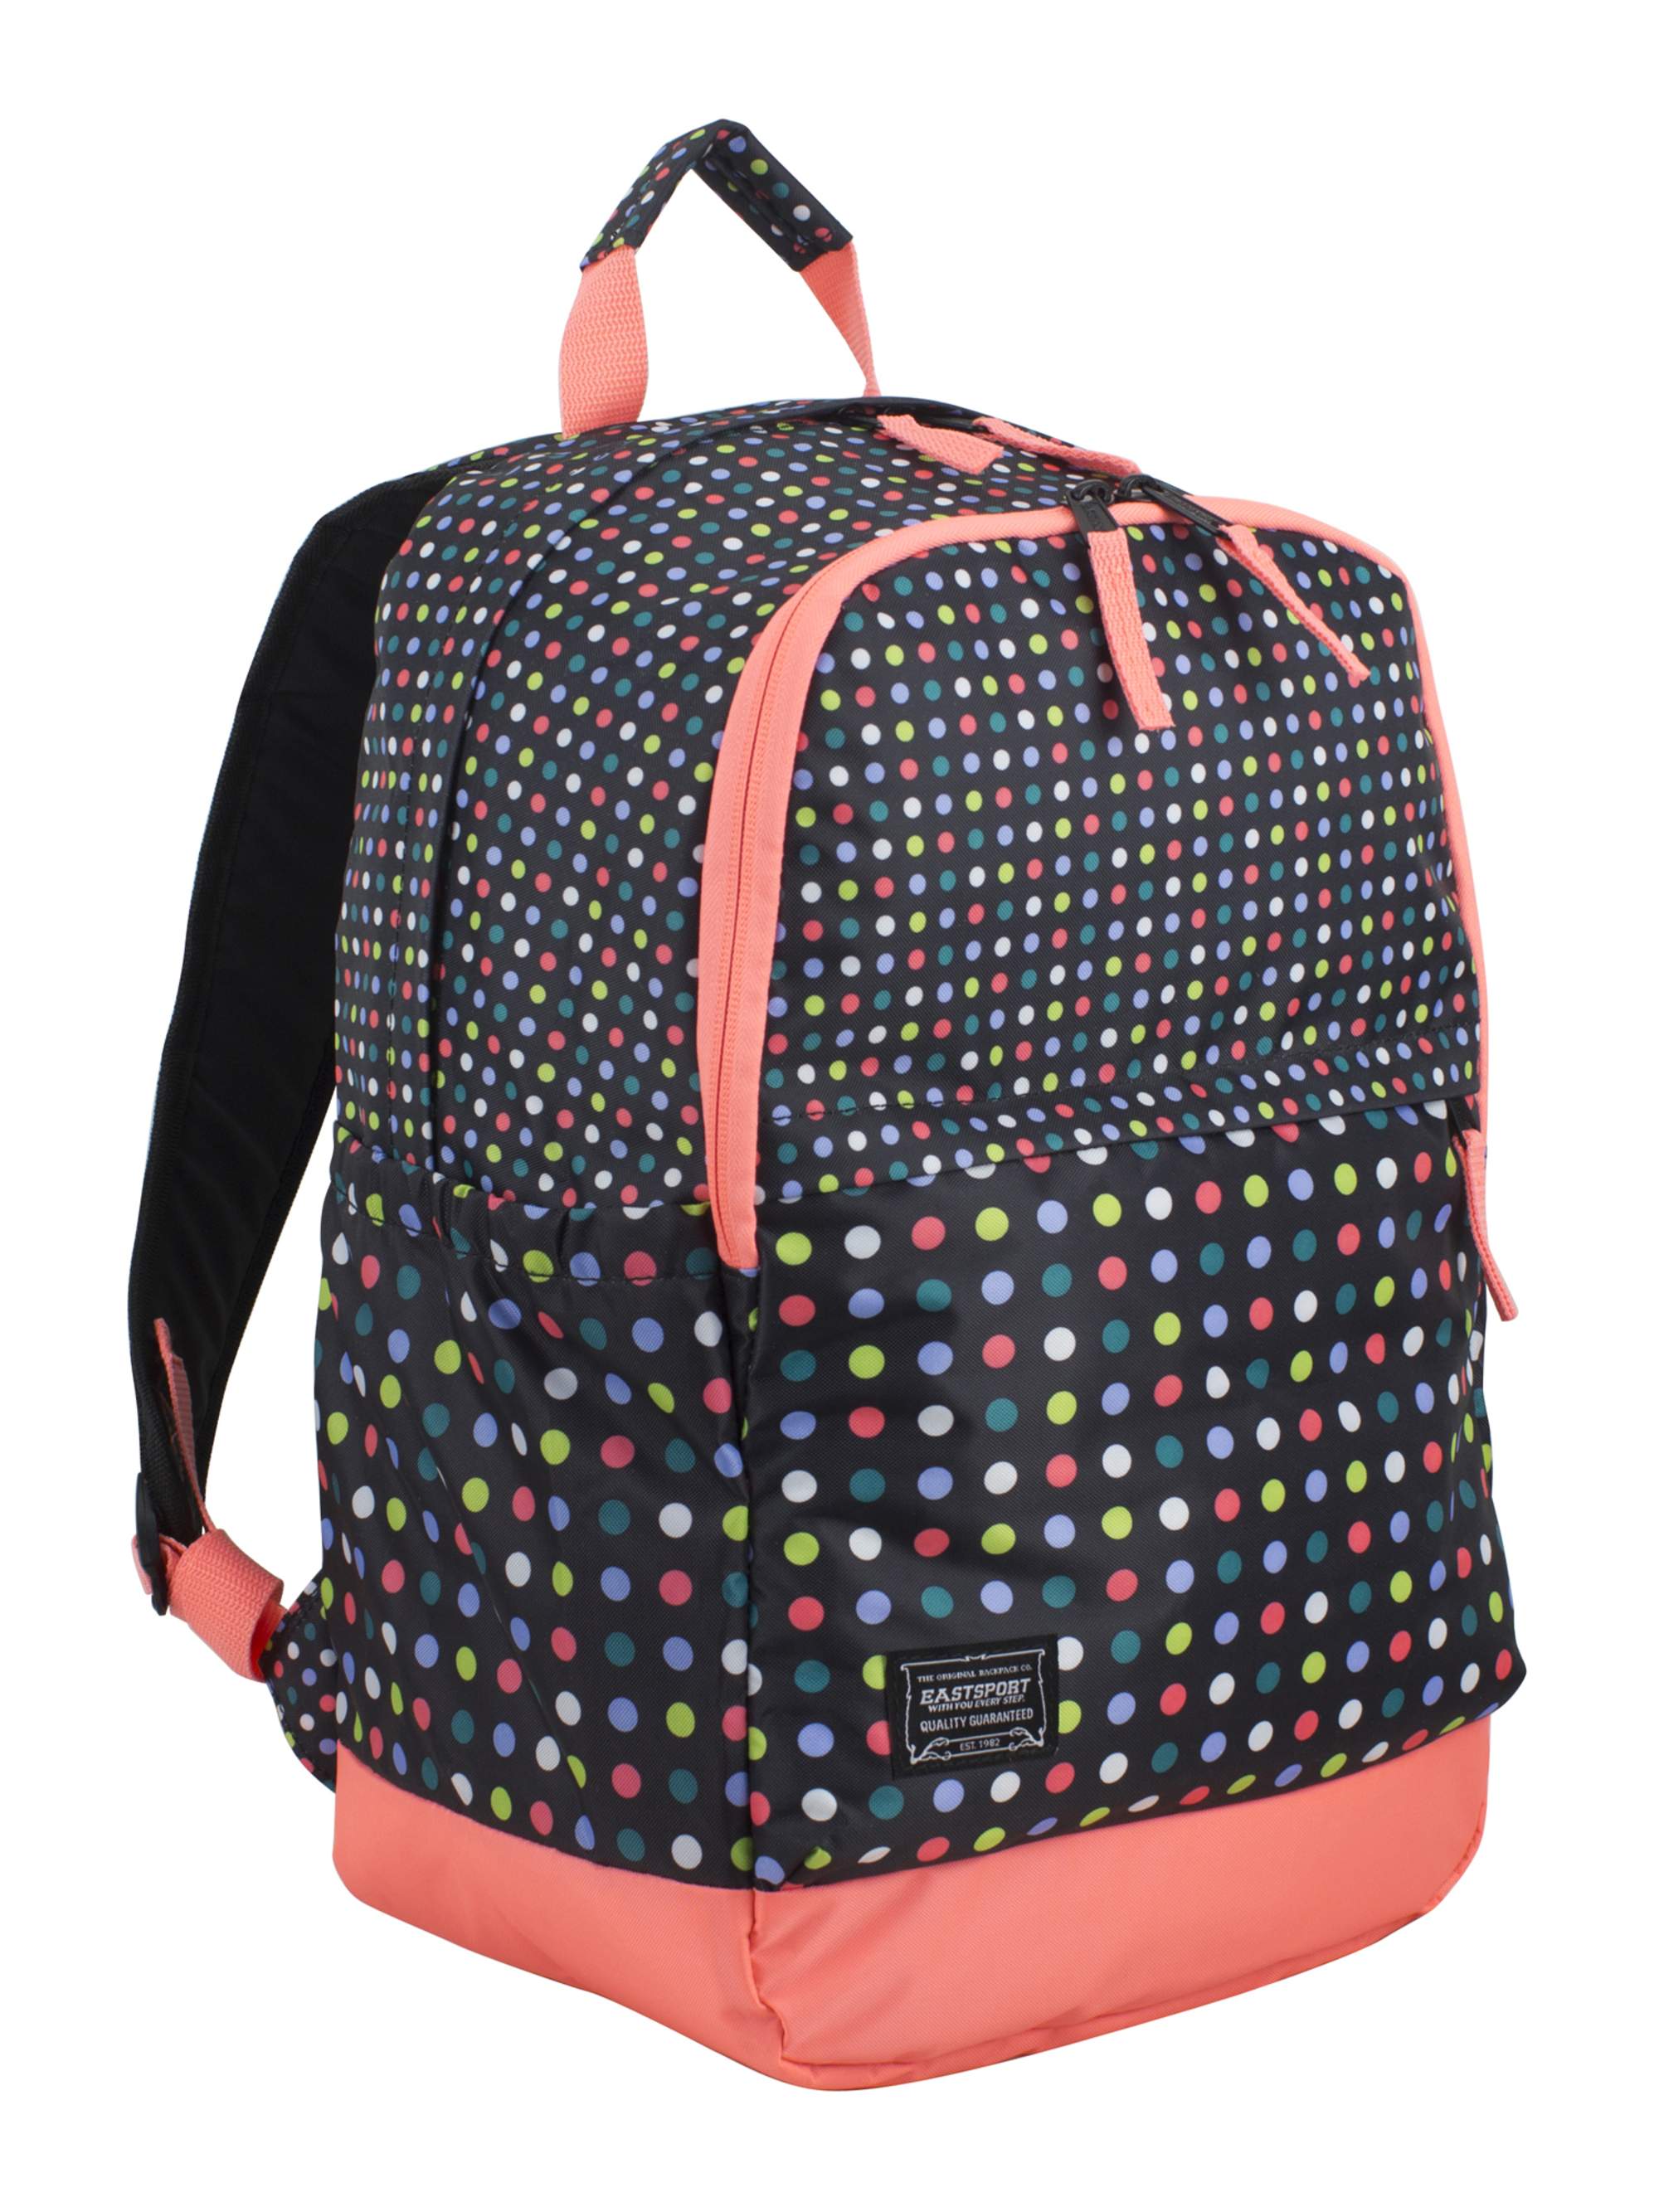 Emma Girl's Student Backpack with Computer Pocket - image 1 of 6